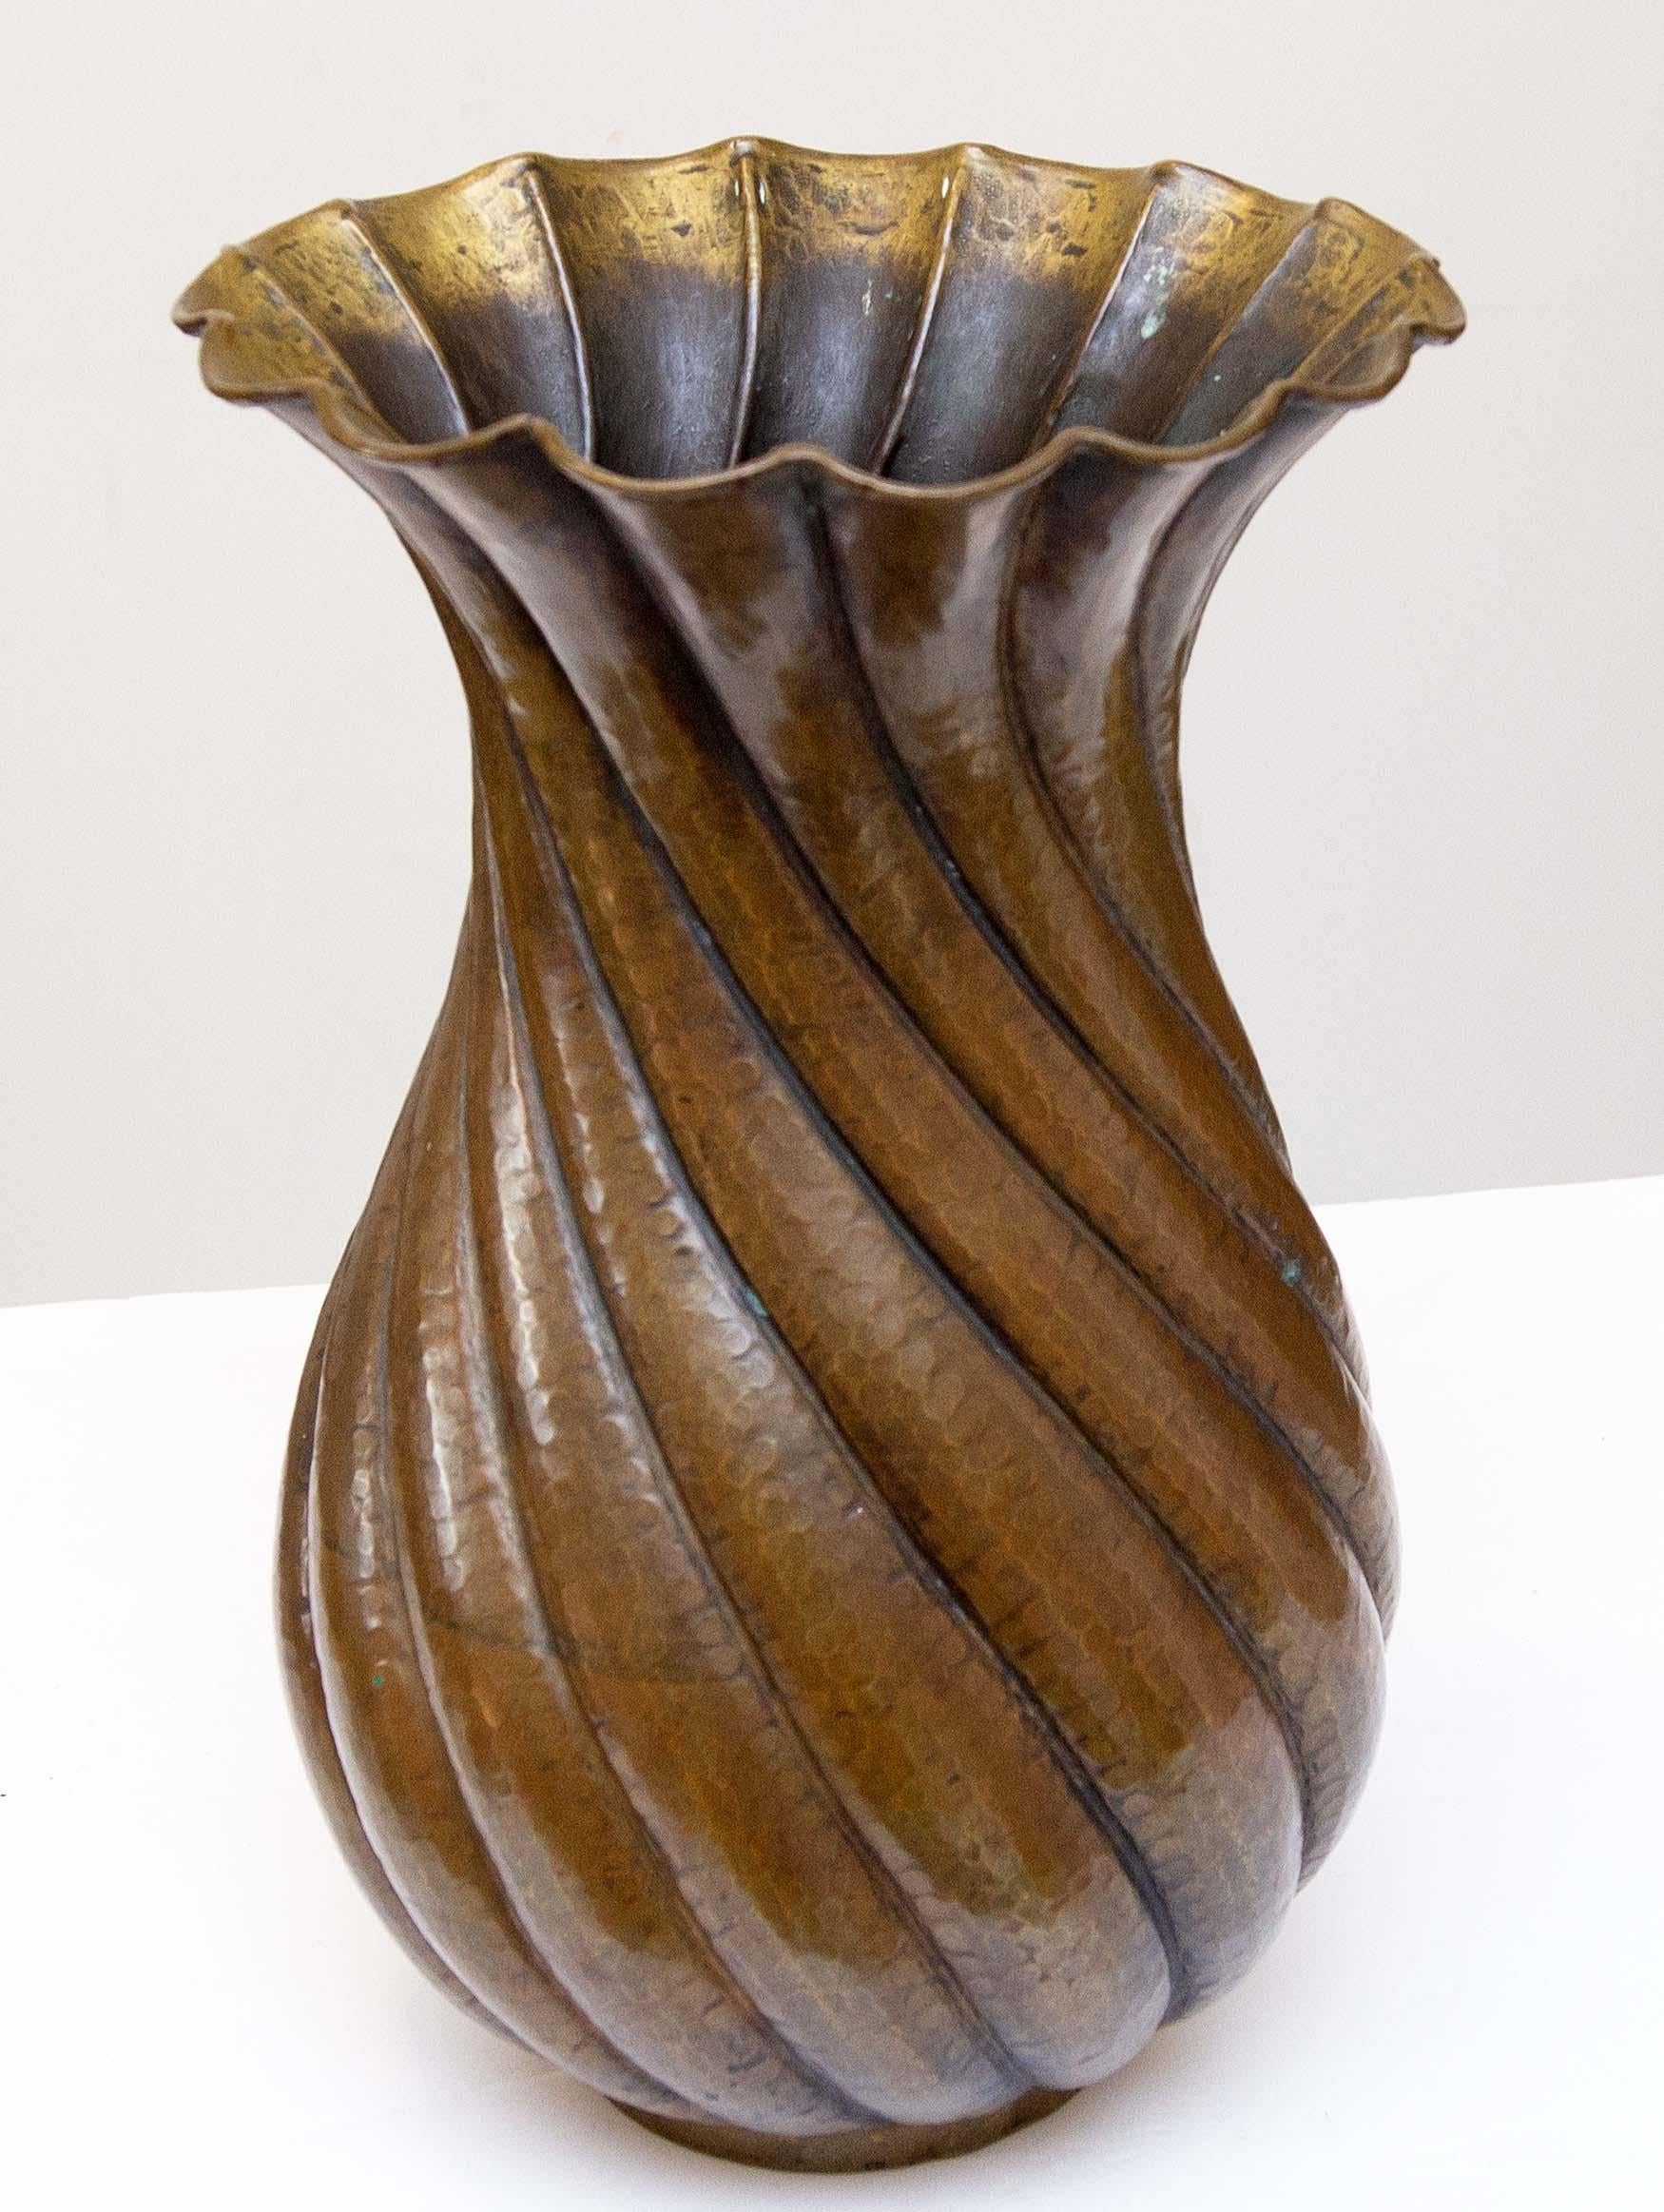 Italian modernist hammered copper vase decorated with spiraling lobes made by Egidio Casagrande. Rich bronze patina, circa 1940s.
Egidio Casagrande (1911-1962).
He worked in brass and copper. He was born in Borgo Valsugana, Italy, in the northern